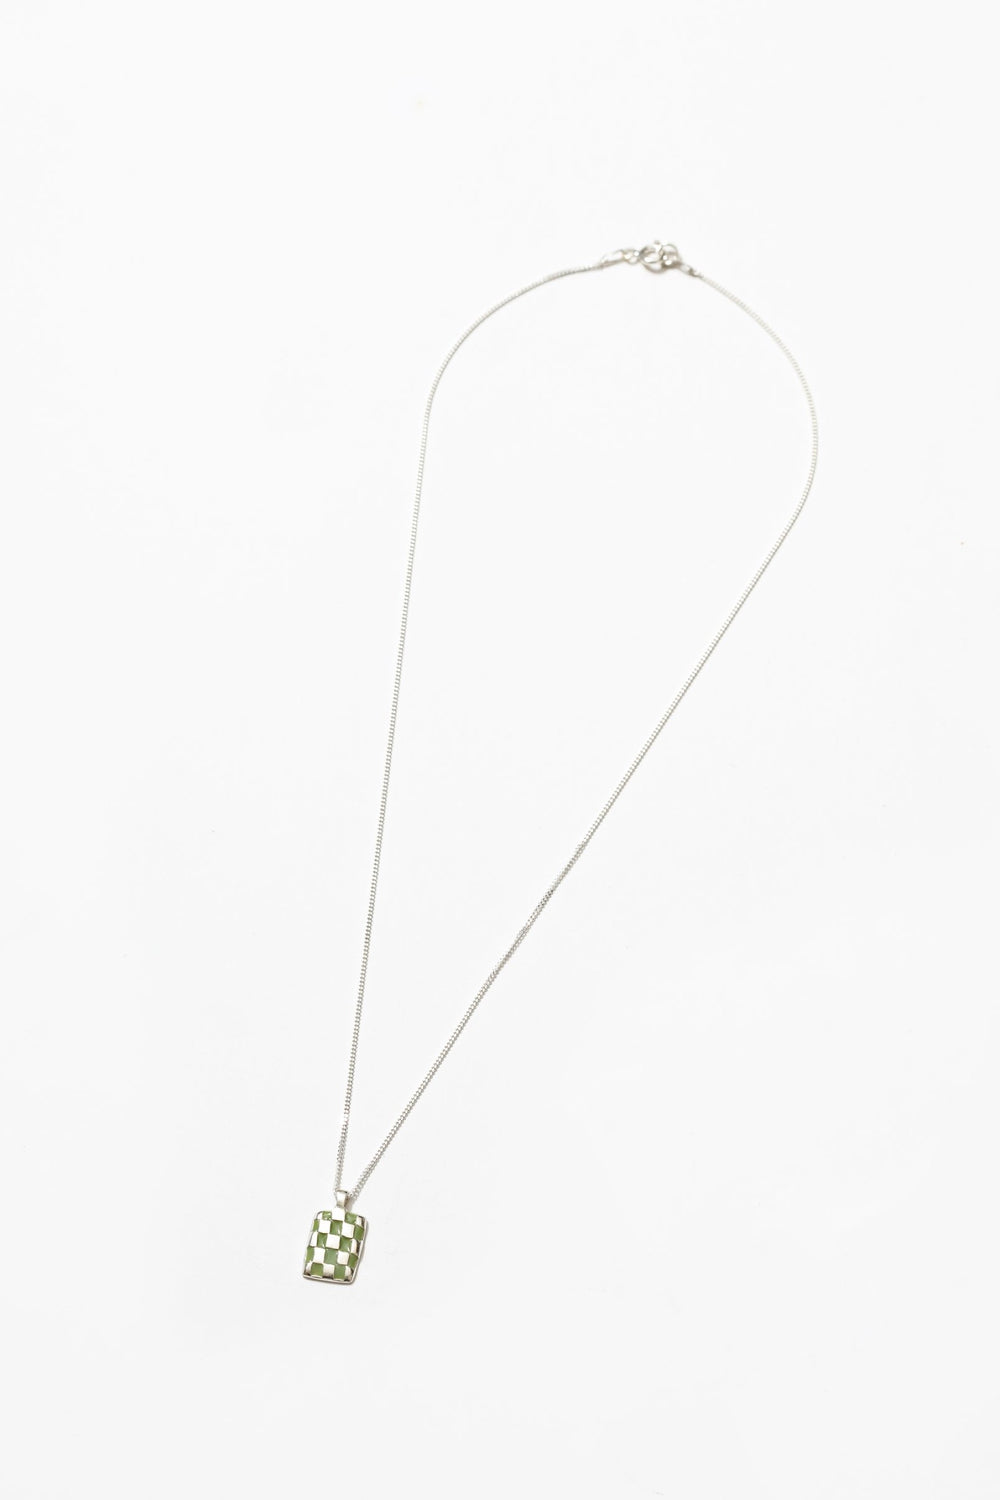 Green + Silver Penny Necklace